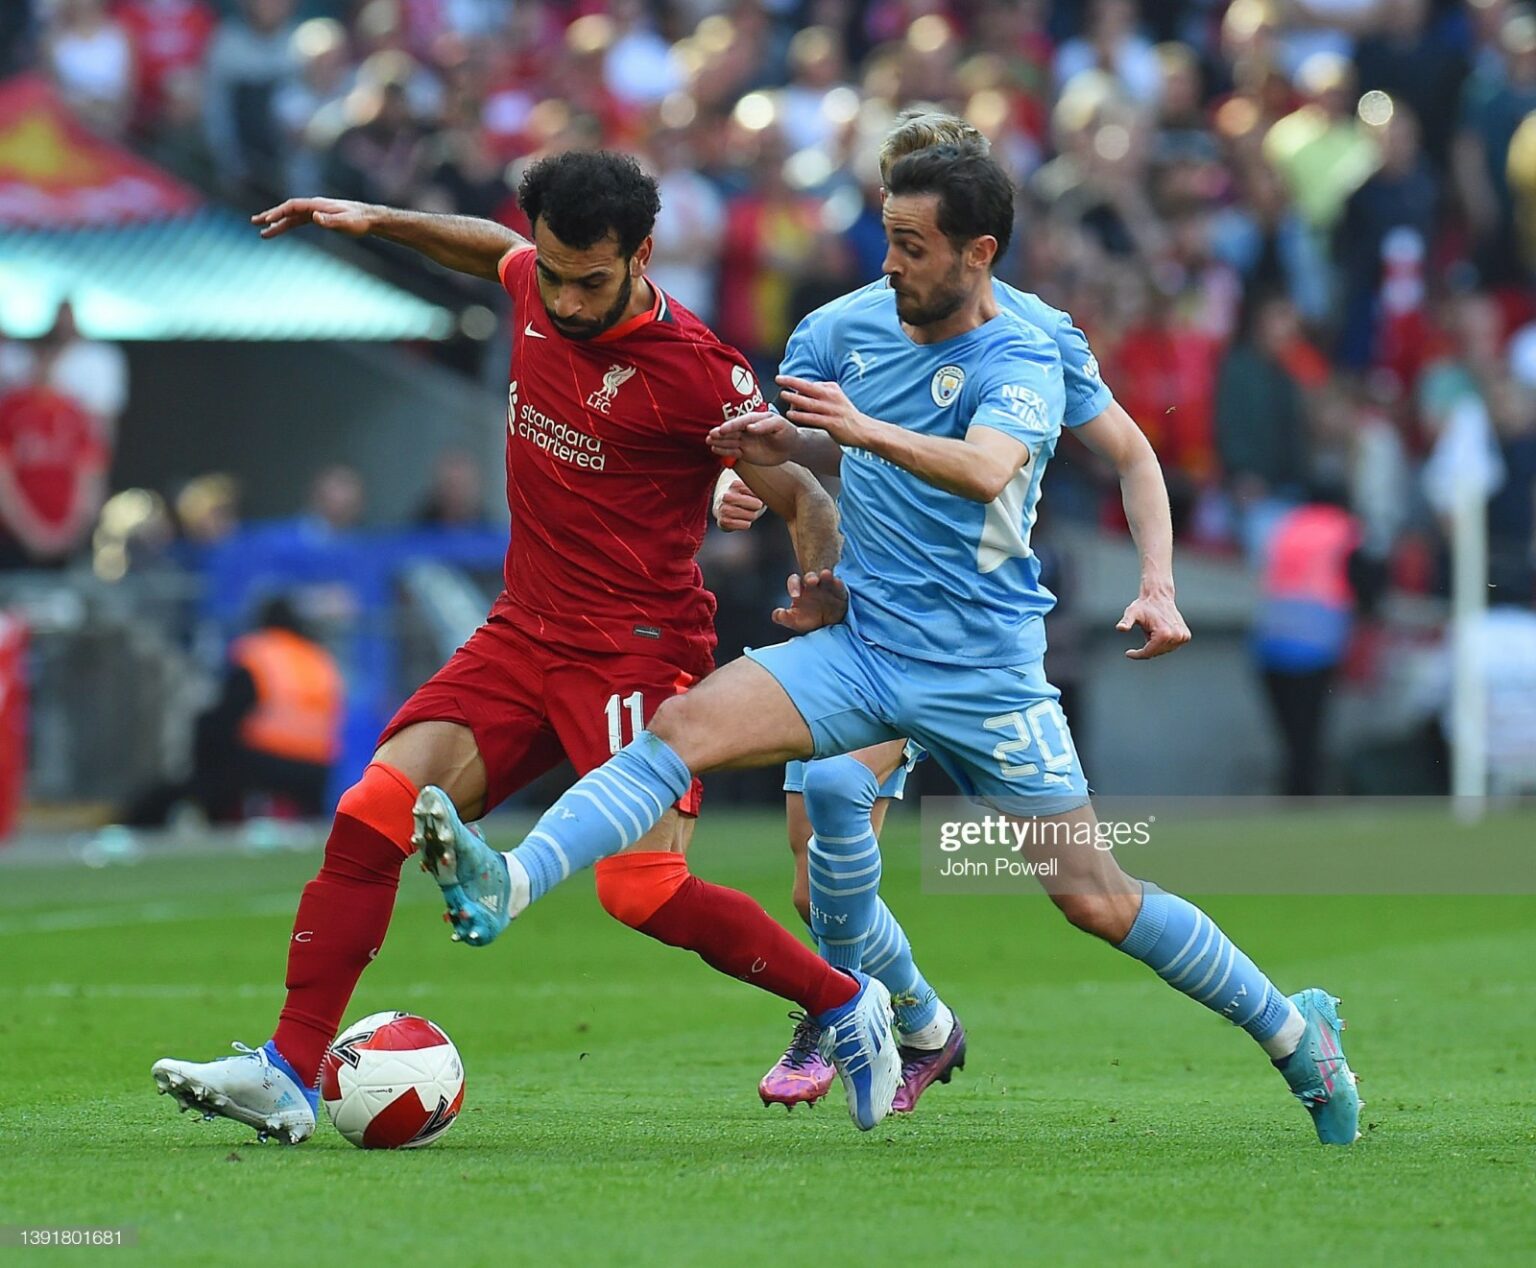 Liverpool faces Manchester City in an enthralling FA Community shield game  - Asiana Times